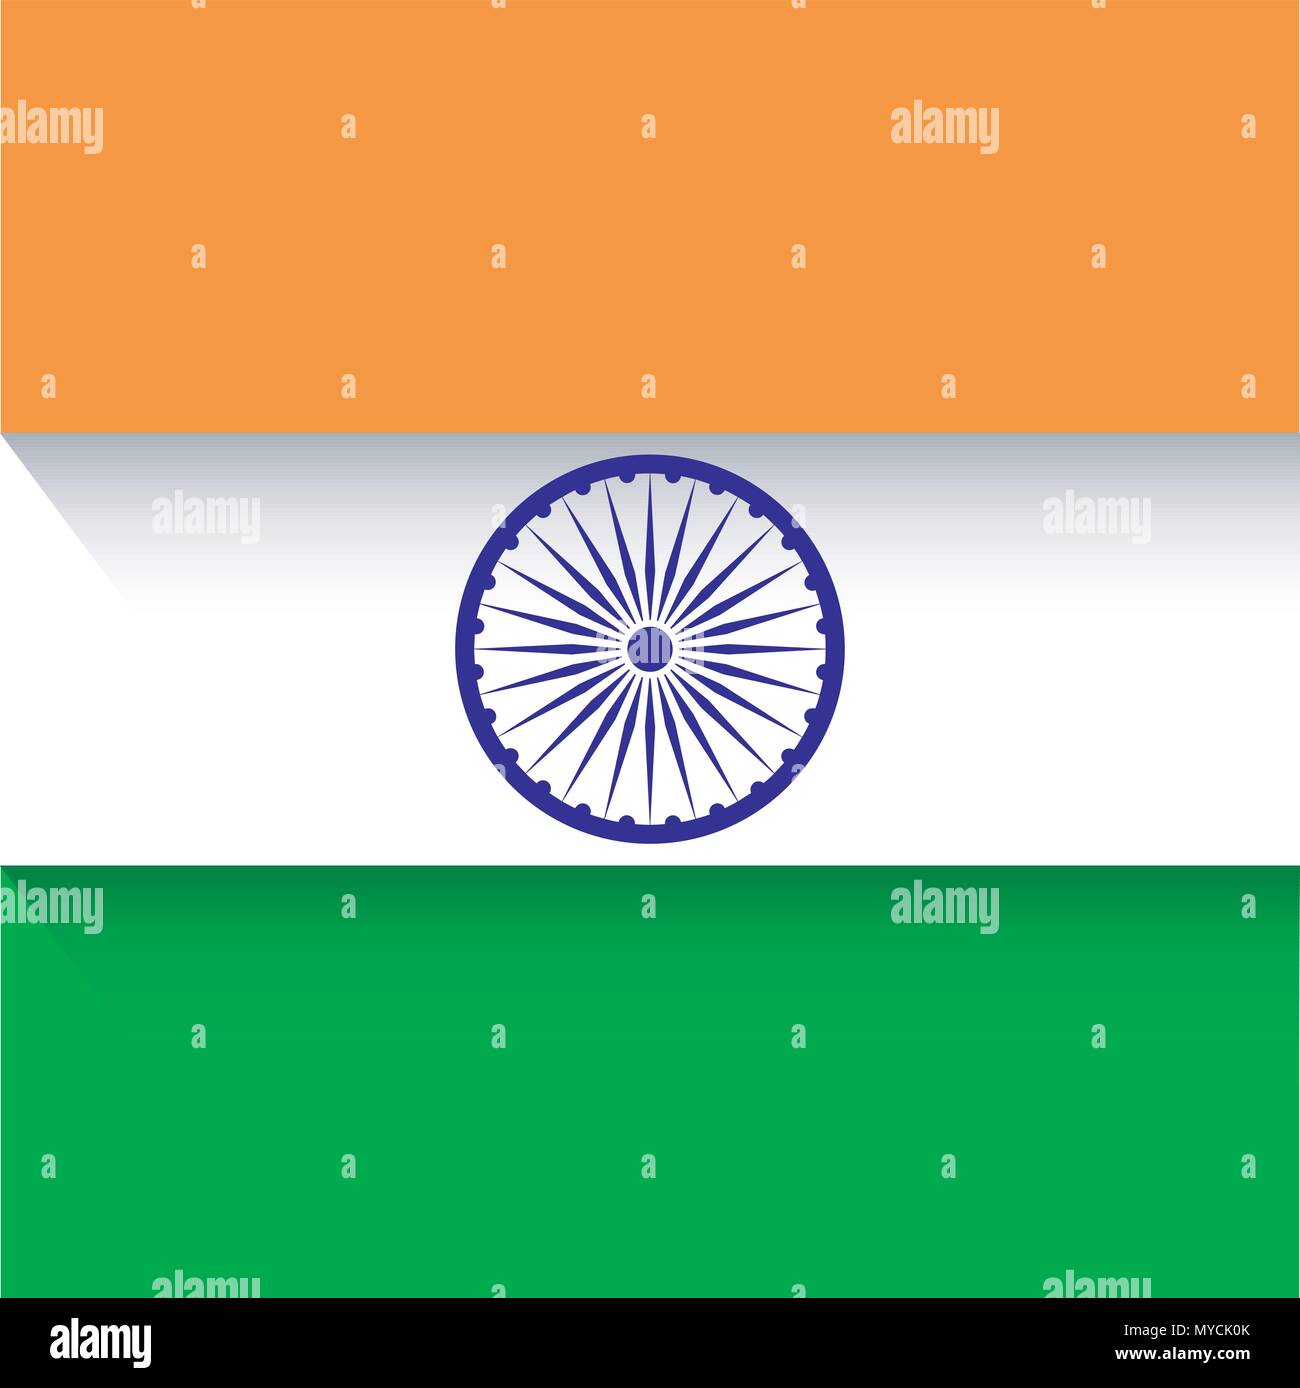 vector design of india country Stock Vector